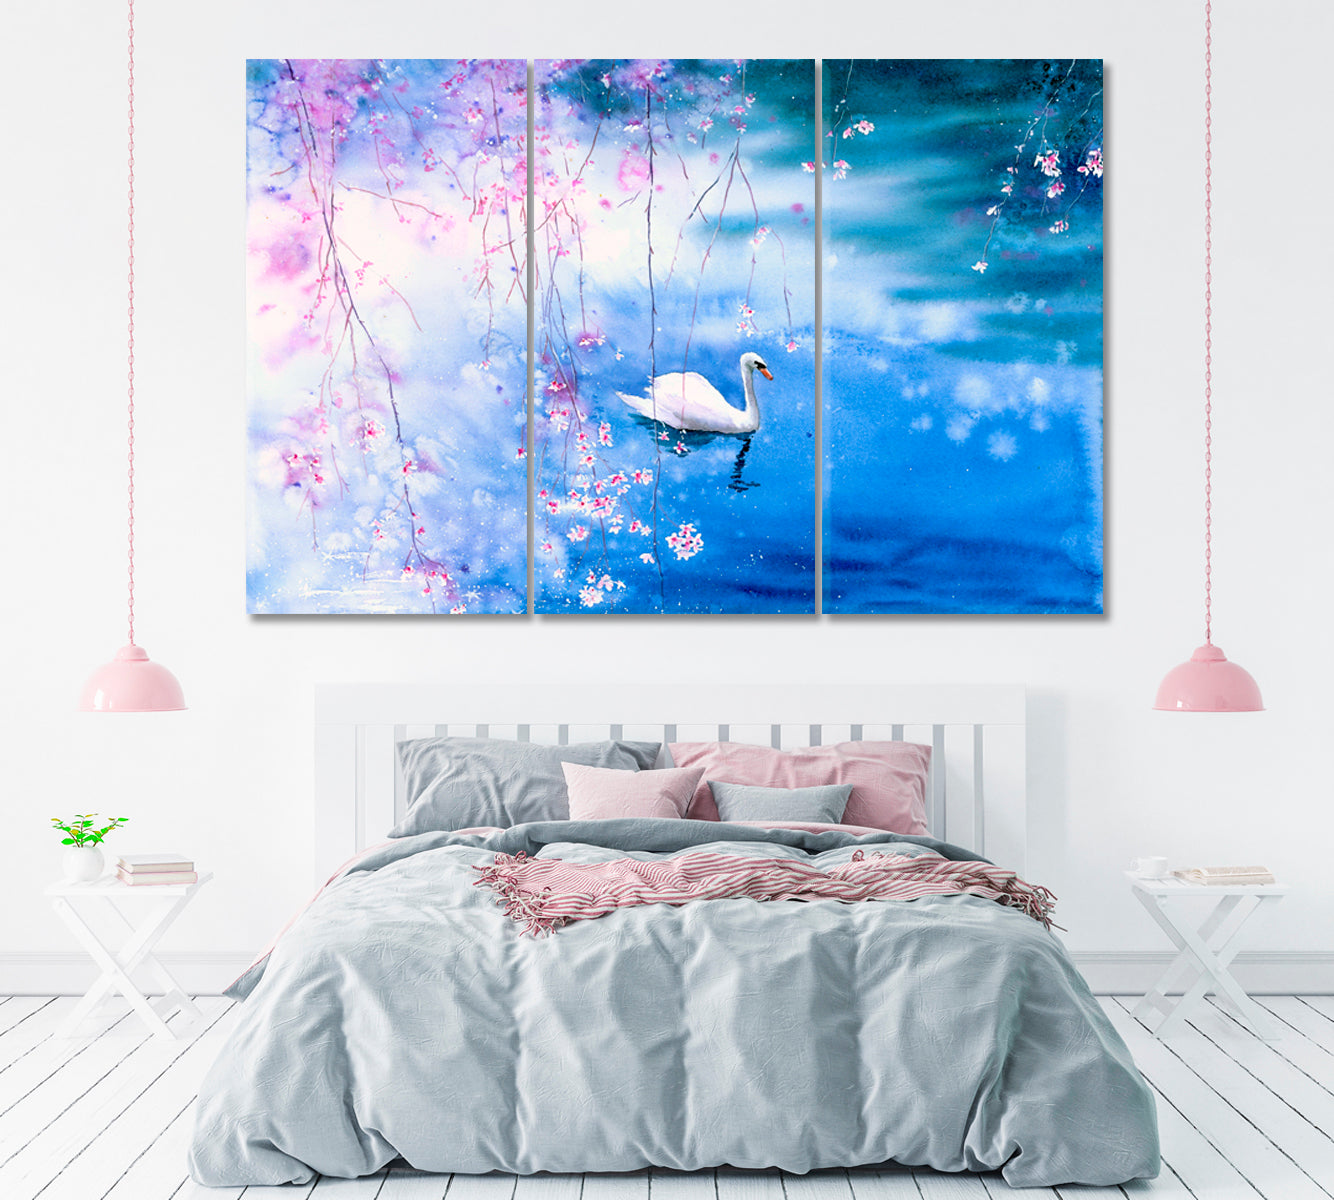 Swan on Lake with Blossom Cherry Canvas Print ArtLexy 3 Panels 36"x24" inches 